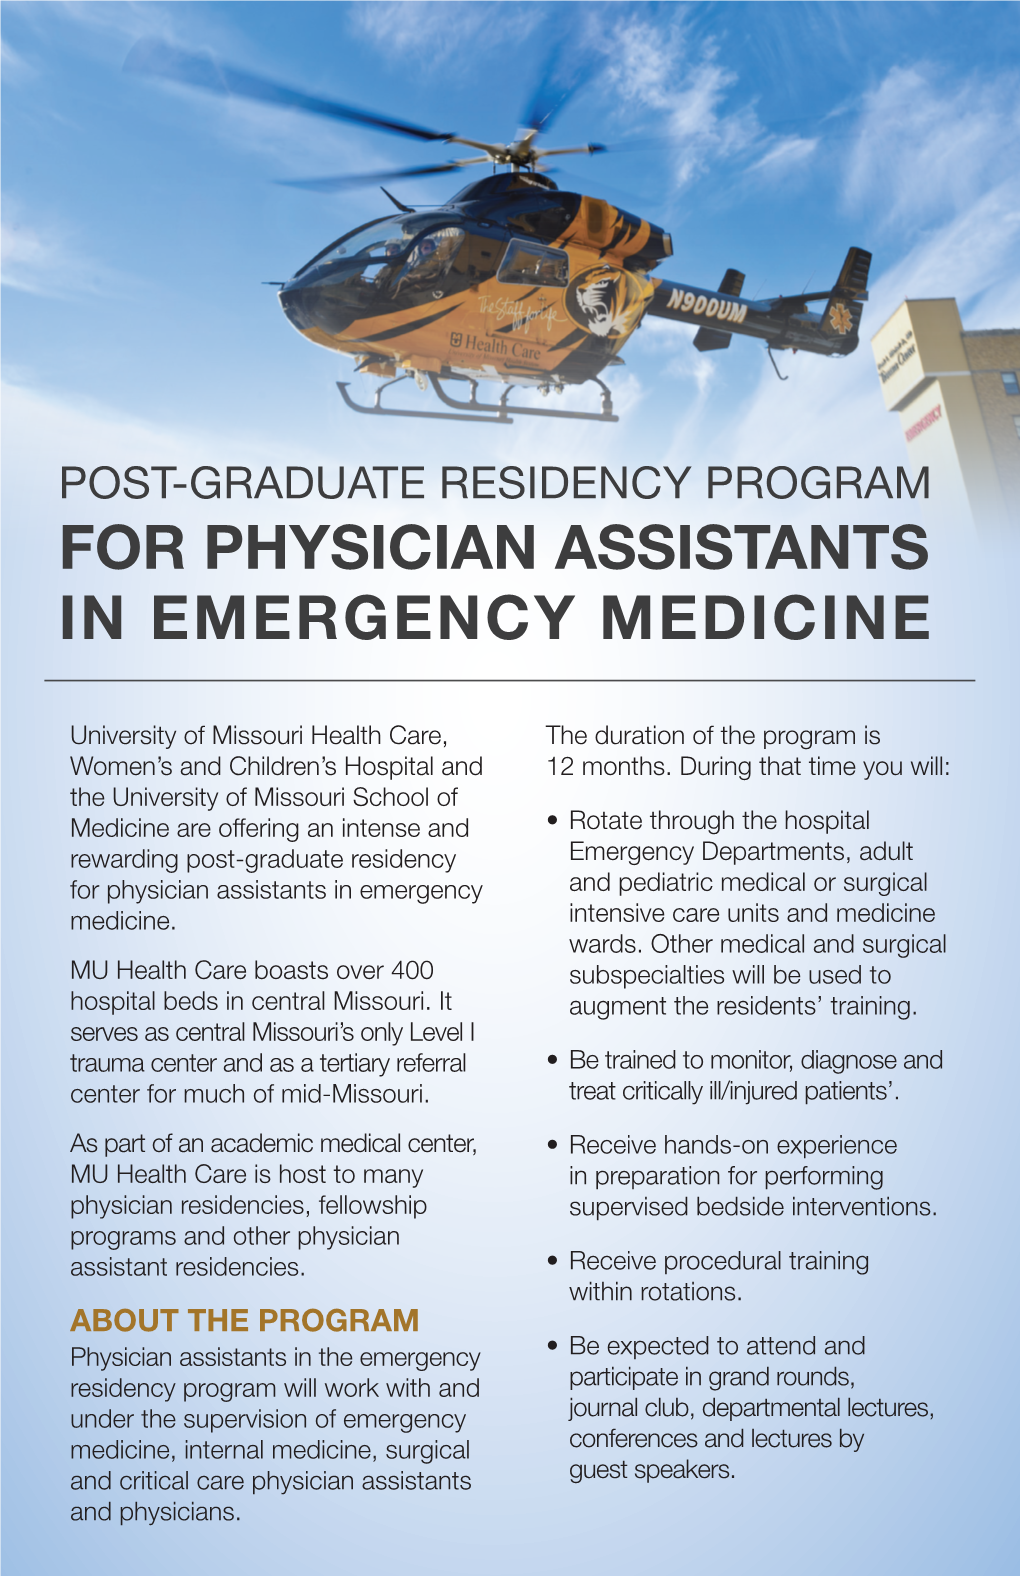 For Physician Assistants in Emergency Medicine